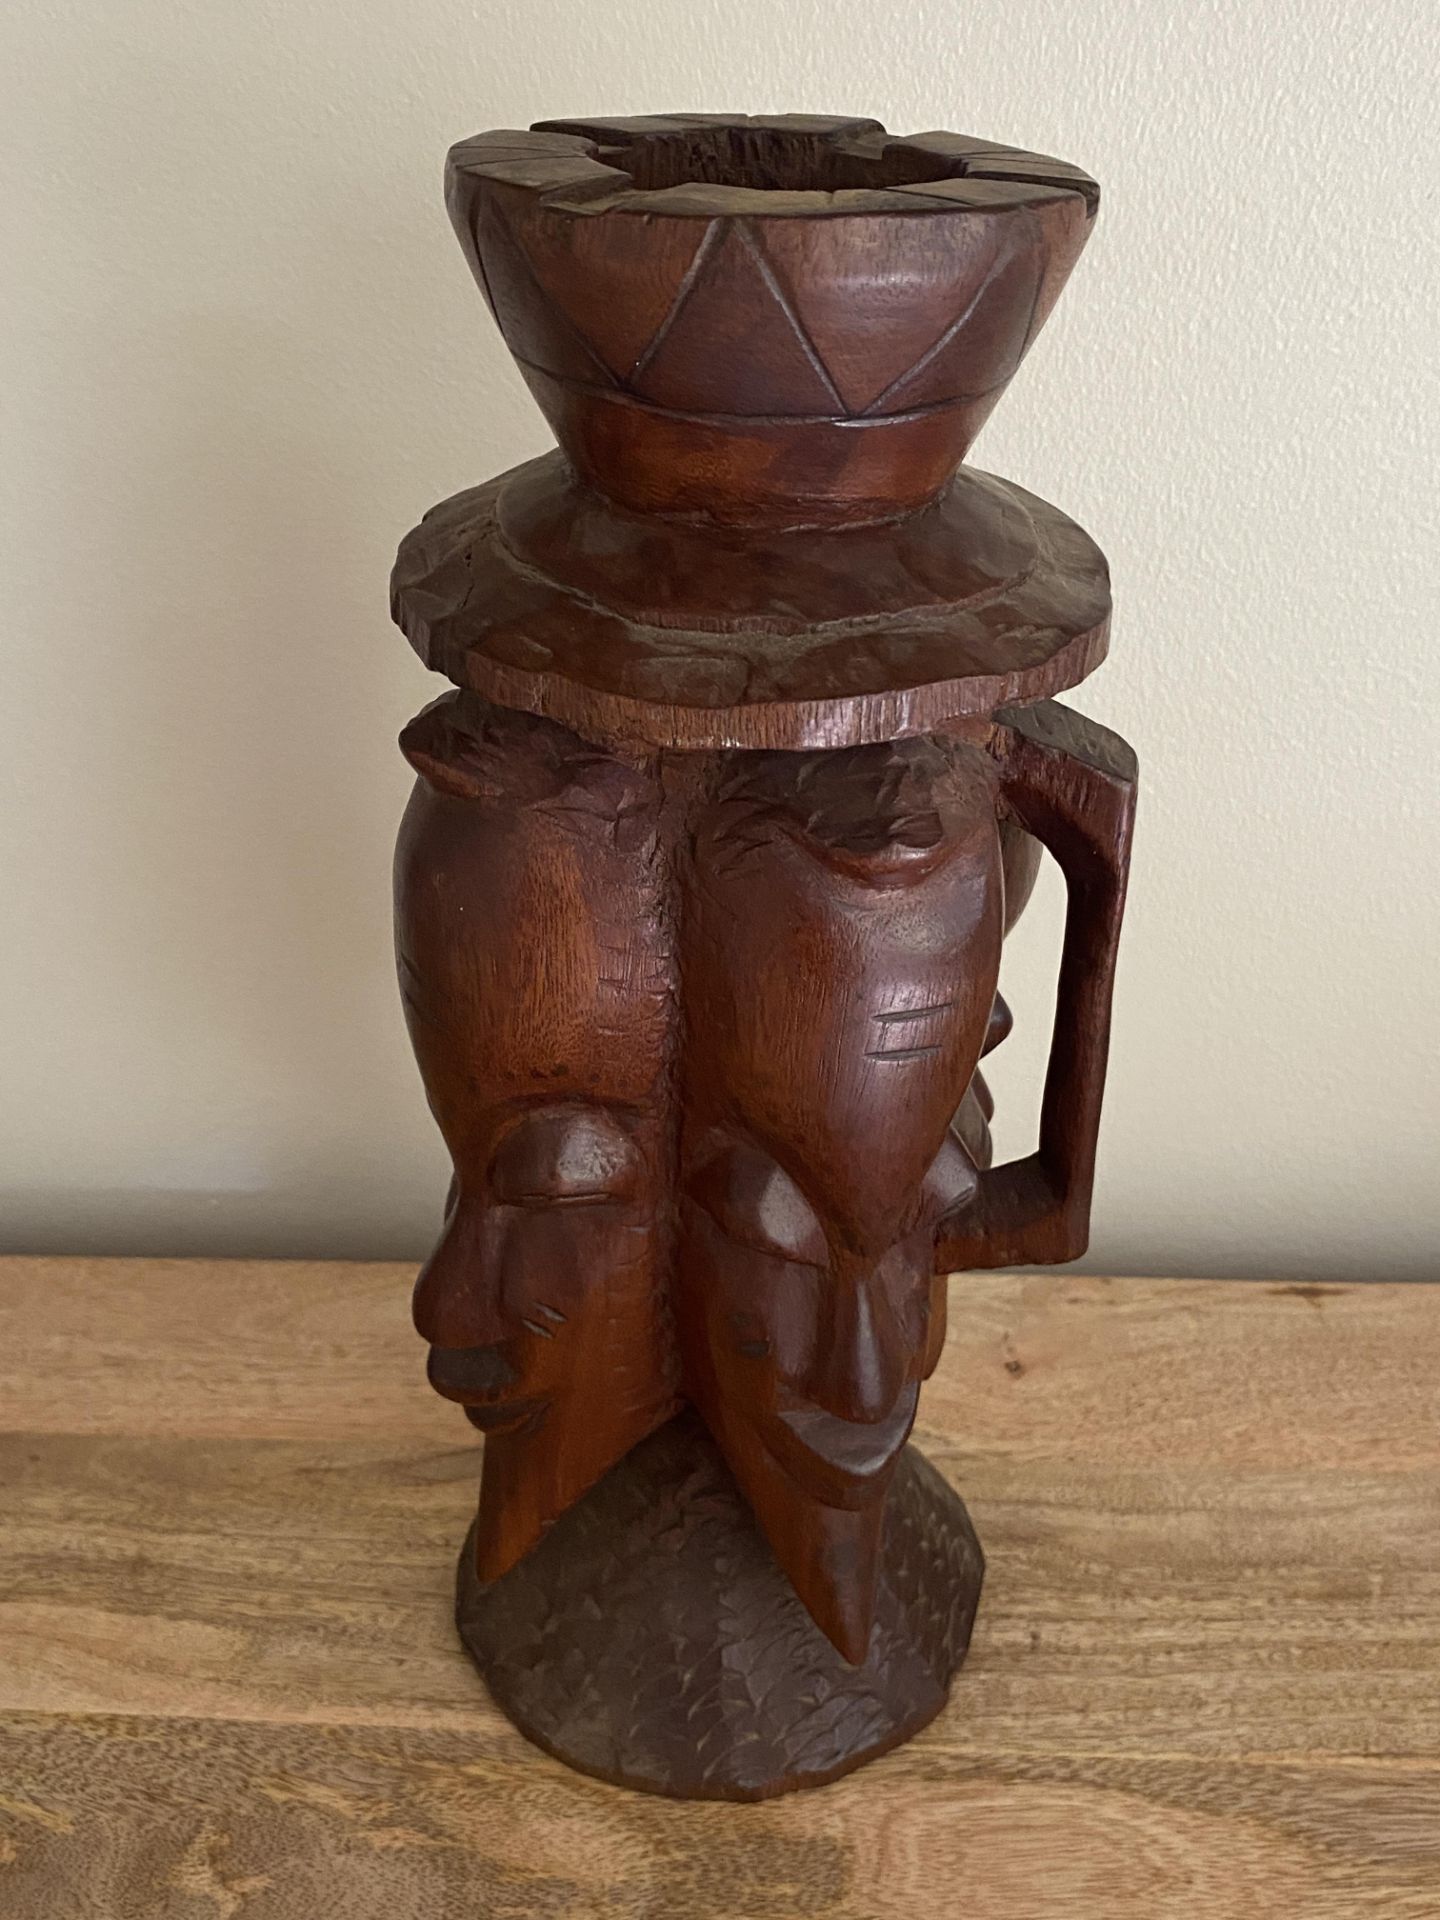 A VINTAGE MID 20TH CENTURY AFRICAN TRIBAL CARVED WOODEN FACE MASK JUG WITH HANDLE AND ASHTRAY DESIGN - Image 3 of 6